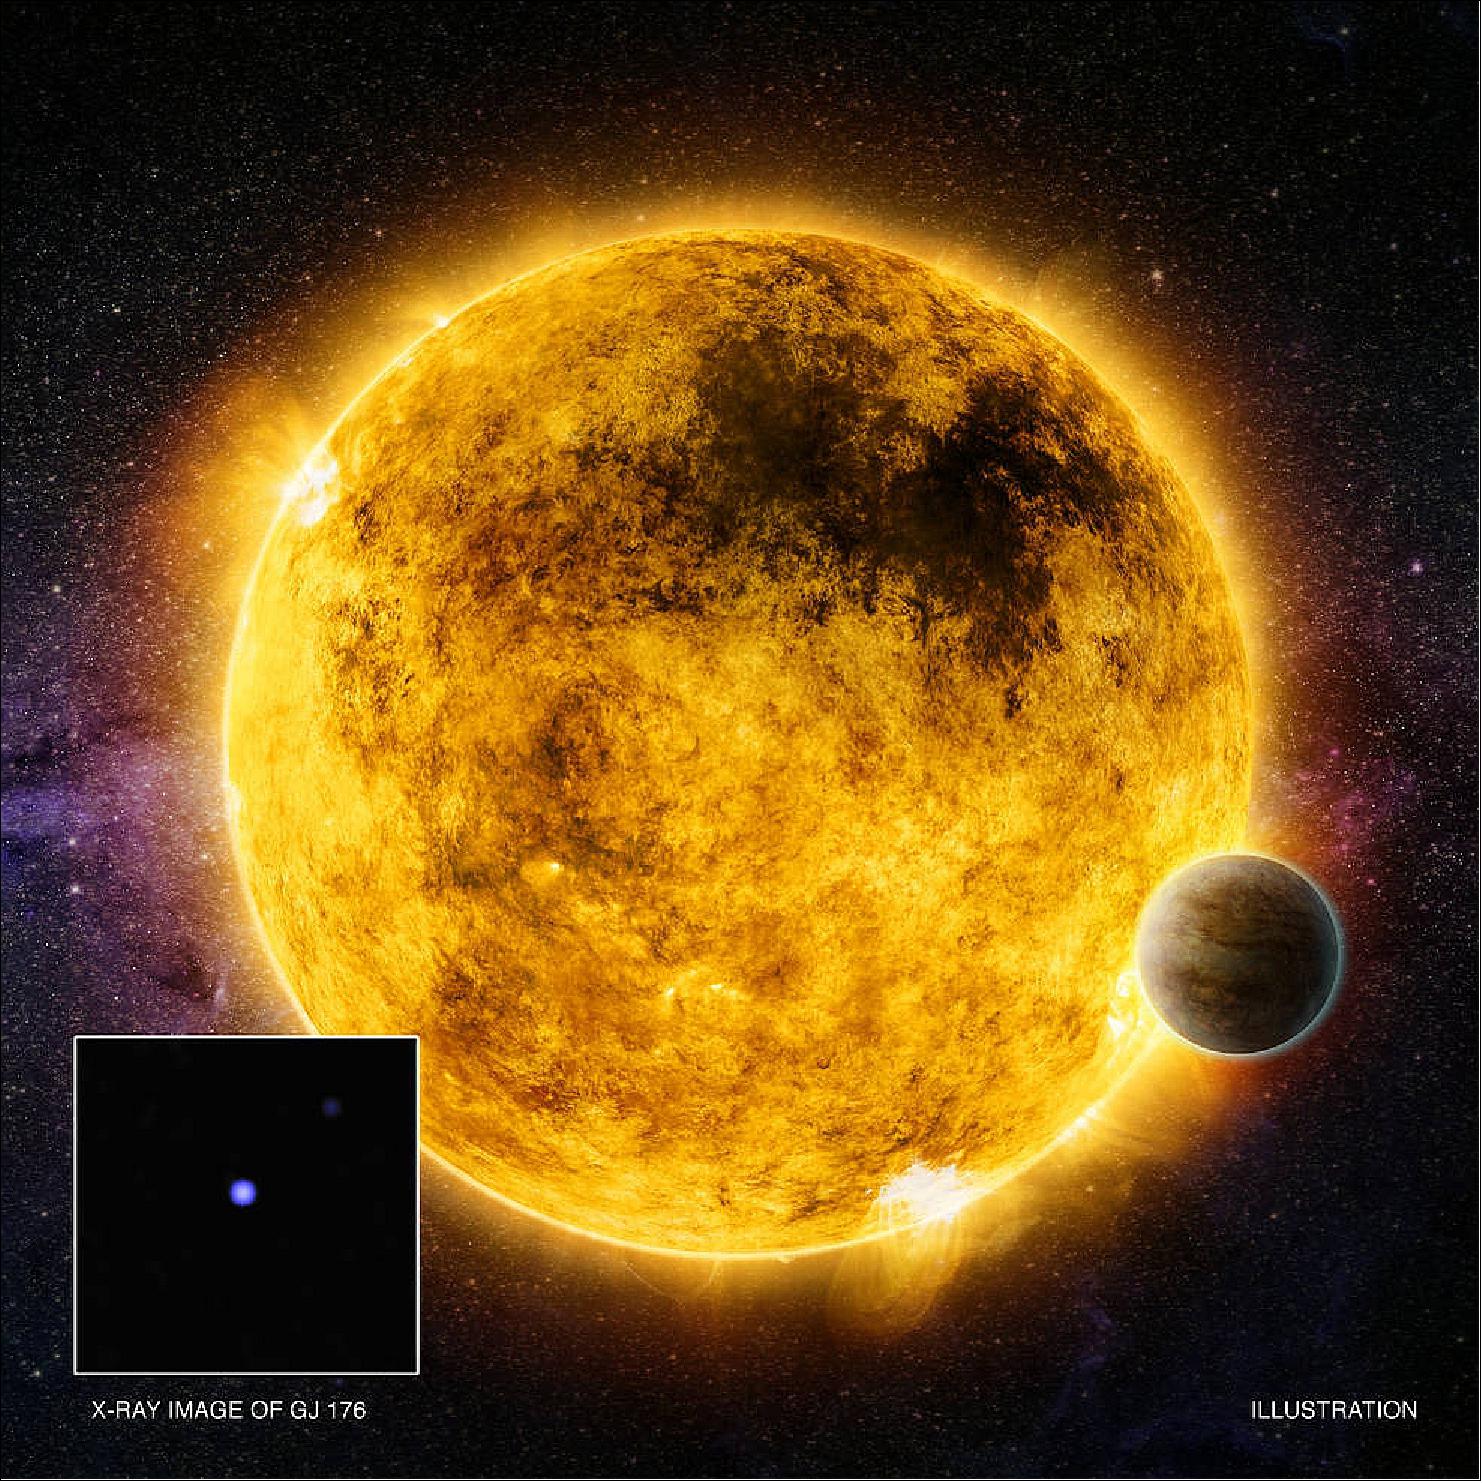 Figure 93: GJ 176: A Sun-like star more than a billion years old (image credit: NASA/CXC/Queens Univ. of Belfast/R. Booth, et al.; Illustration: NASA/CXC/M. Weiss)